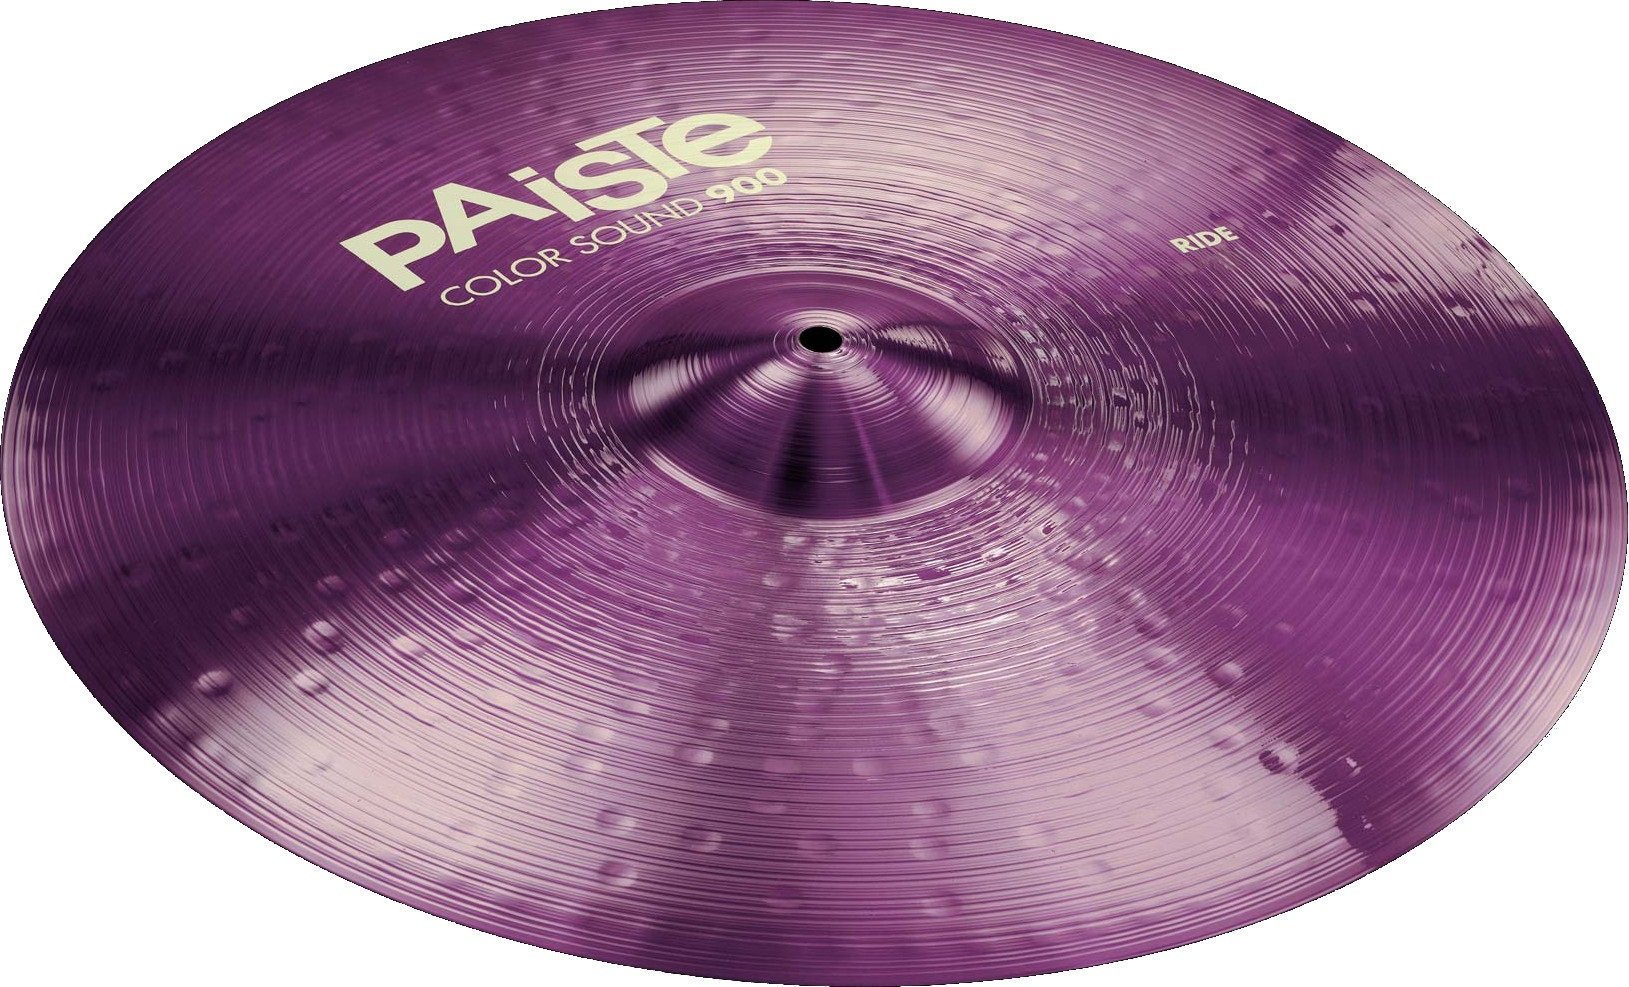 Ride Cymbal Paiste Color Sound 900 Ride Cymbal 22" Violet